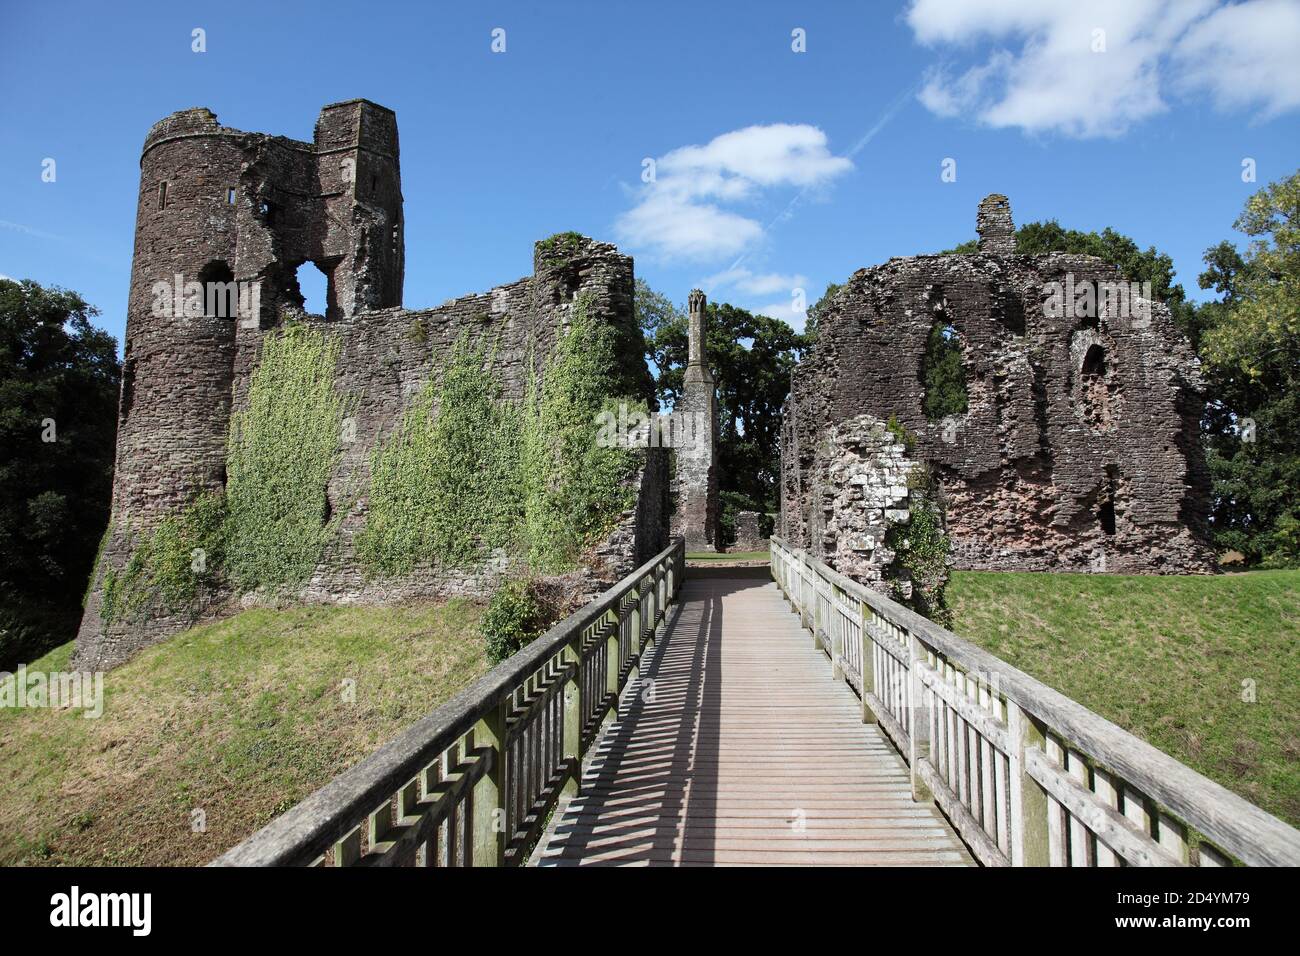 Grosmont Castle in the village of Grosmont, Monmouthshire, Wales, was built by William FitzOsbern in the 13th.Century. Stock Photo